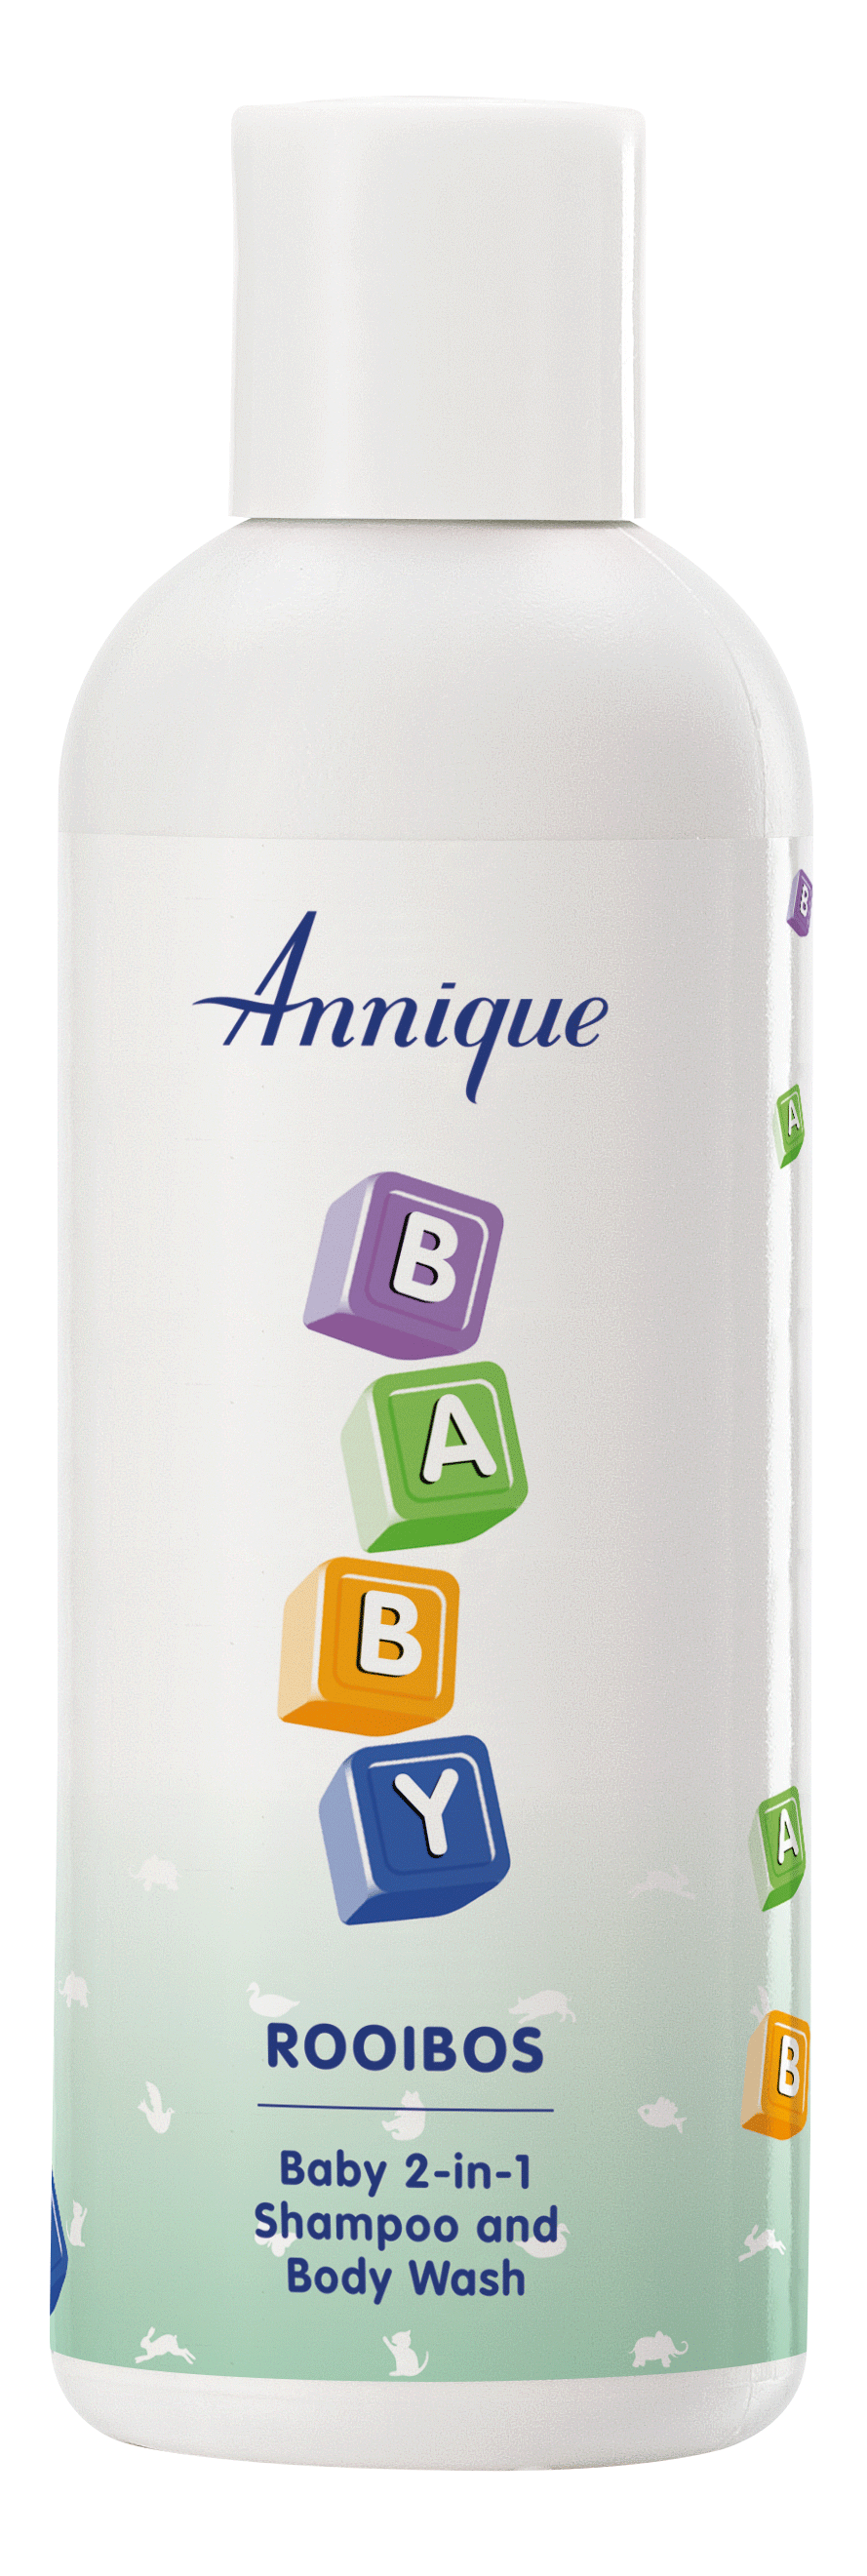 Baby 2-in-1 Shampoo and Body Wash – 200ml